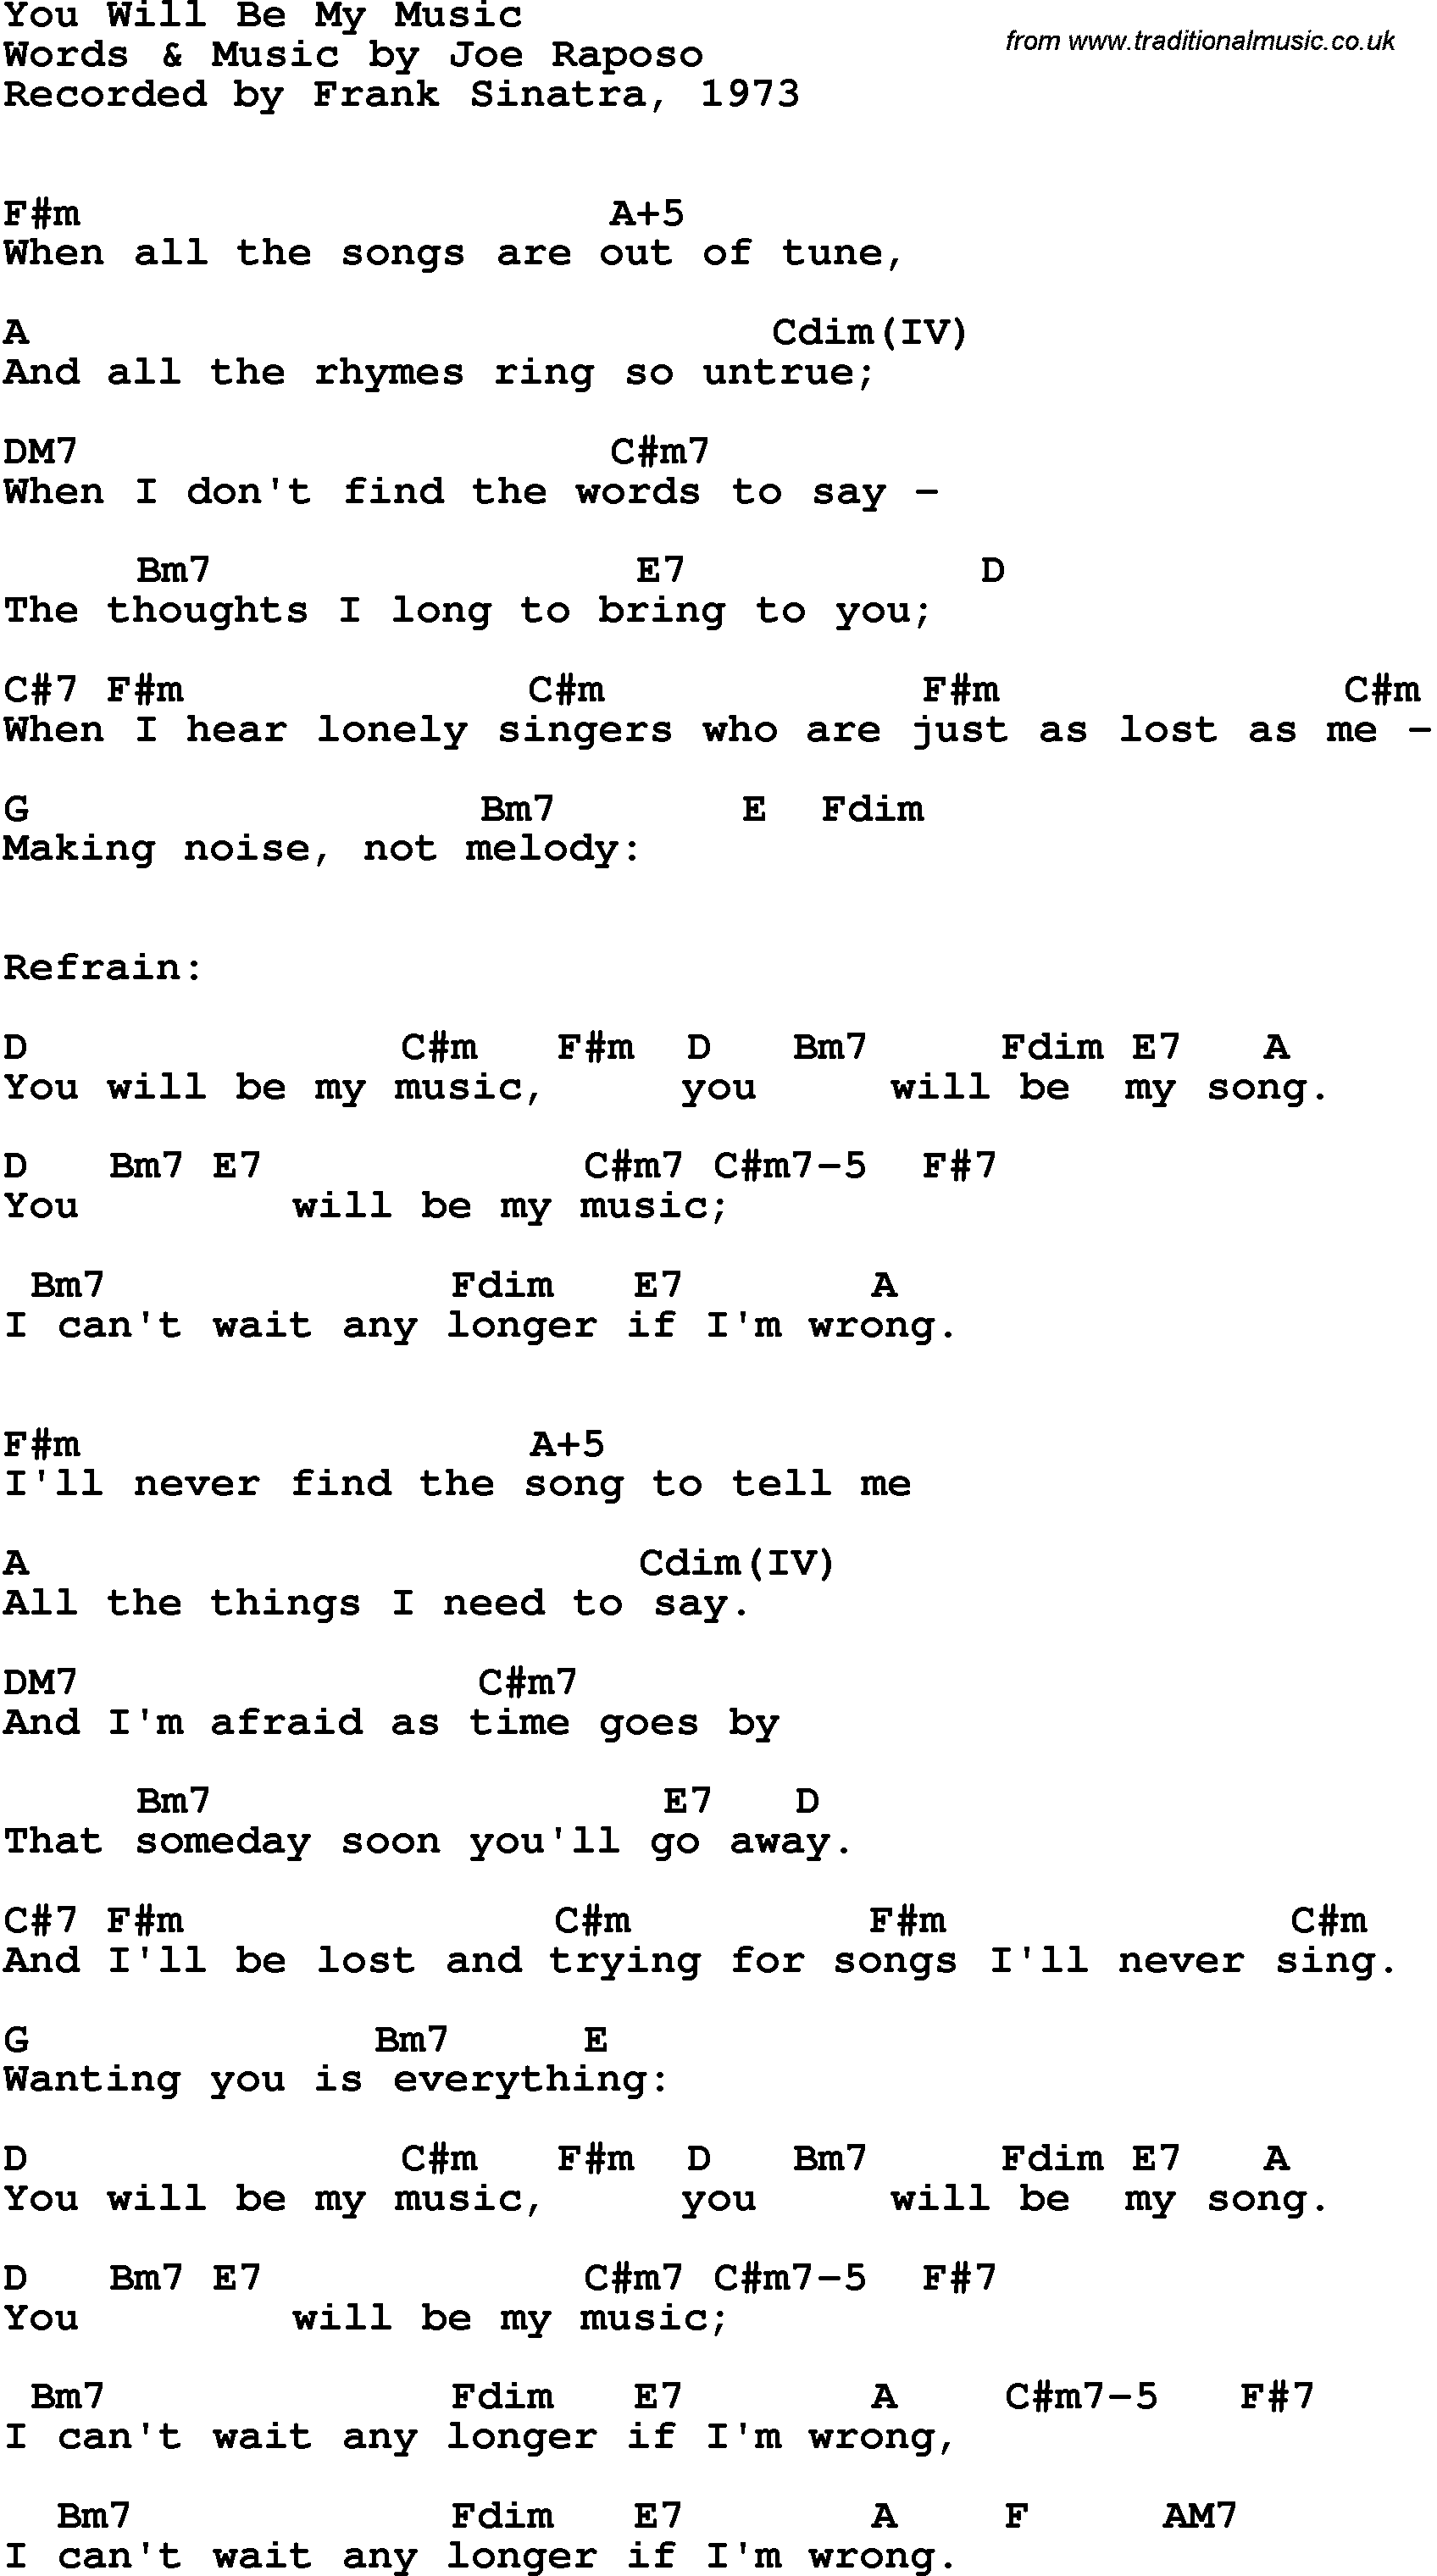 Song Lyrics with guitar chords for You Will Be My Music - Frank Sinatra, 1973